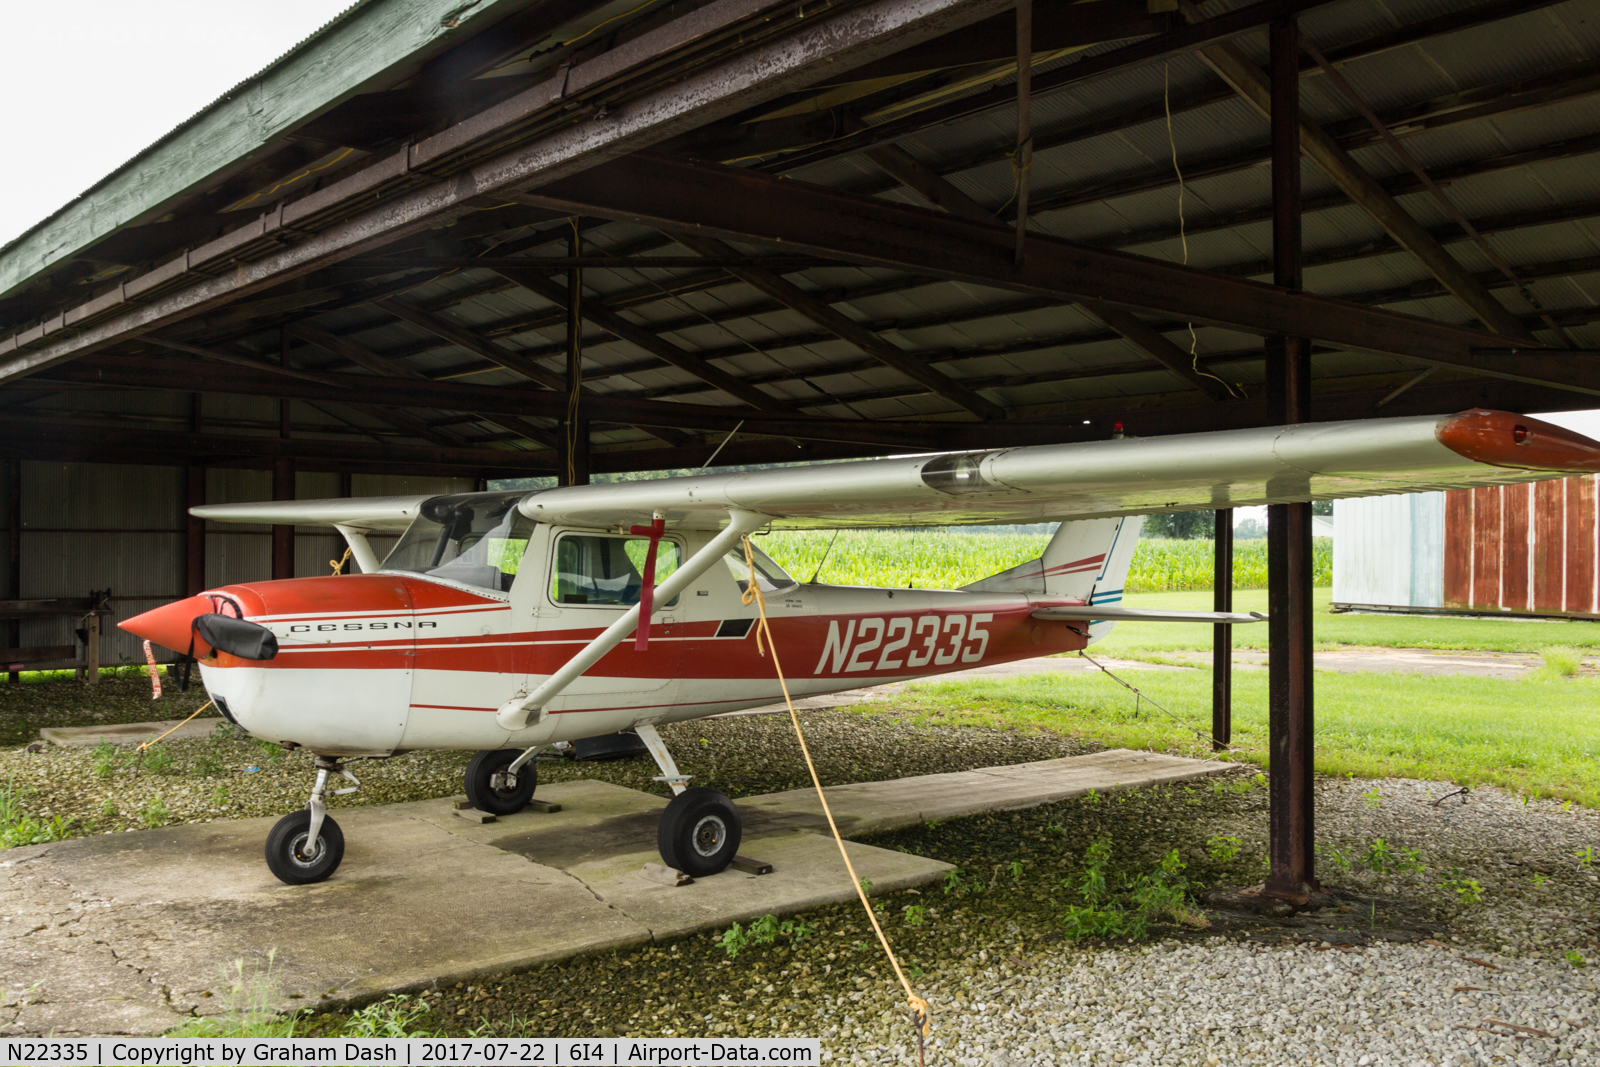 N22335, 1968 Cessna 150H C/N 15068222, Cessna 150 at Lebanon (Boone County) Airport, Indiana